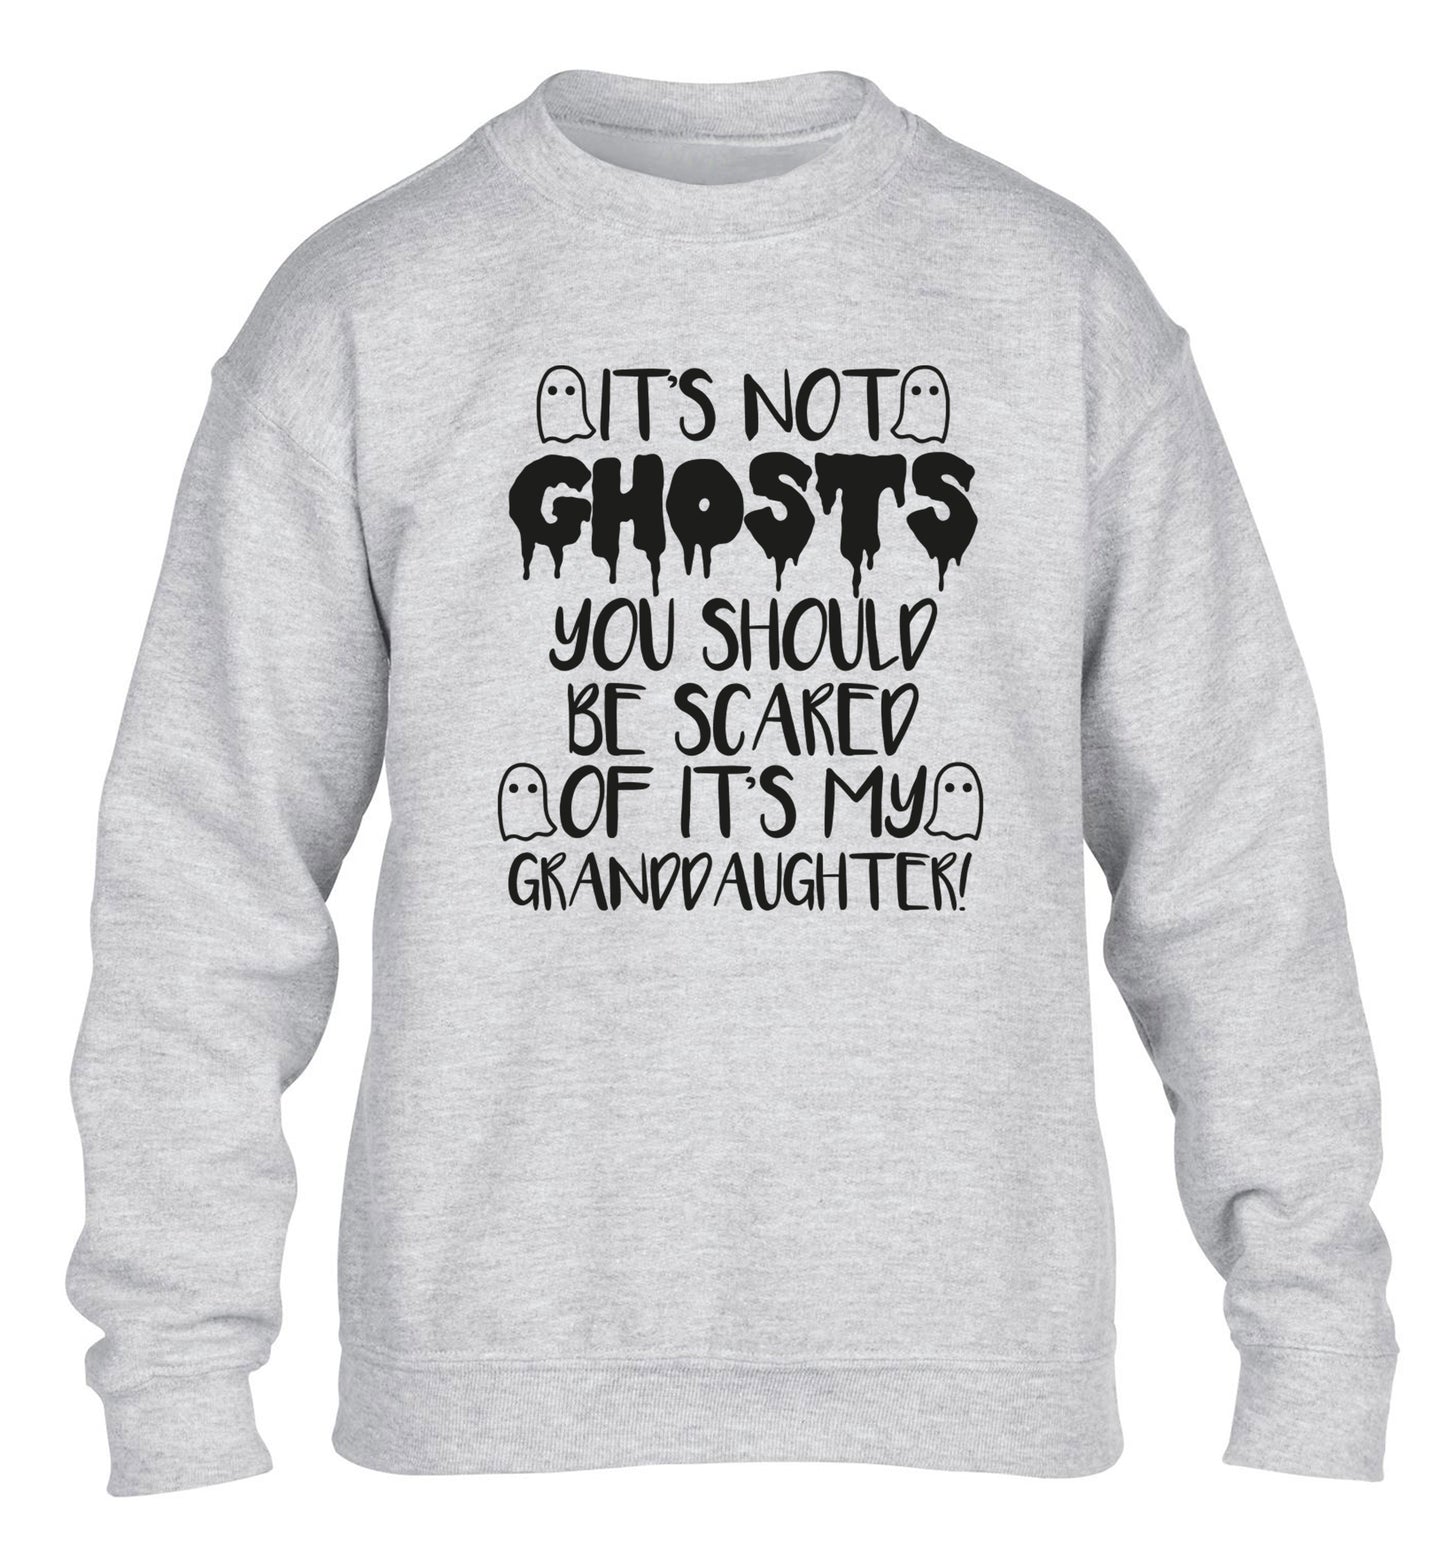 It's not ghosts you should be scared of it's my granddaughter! children's grey sweater 12-14 Years